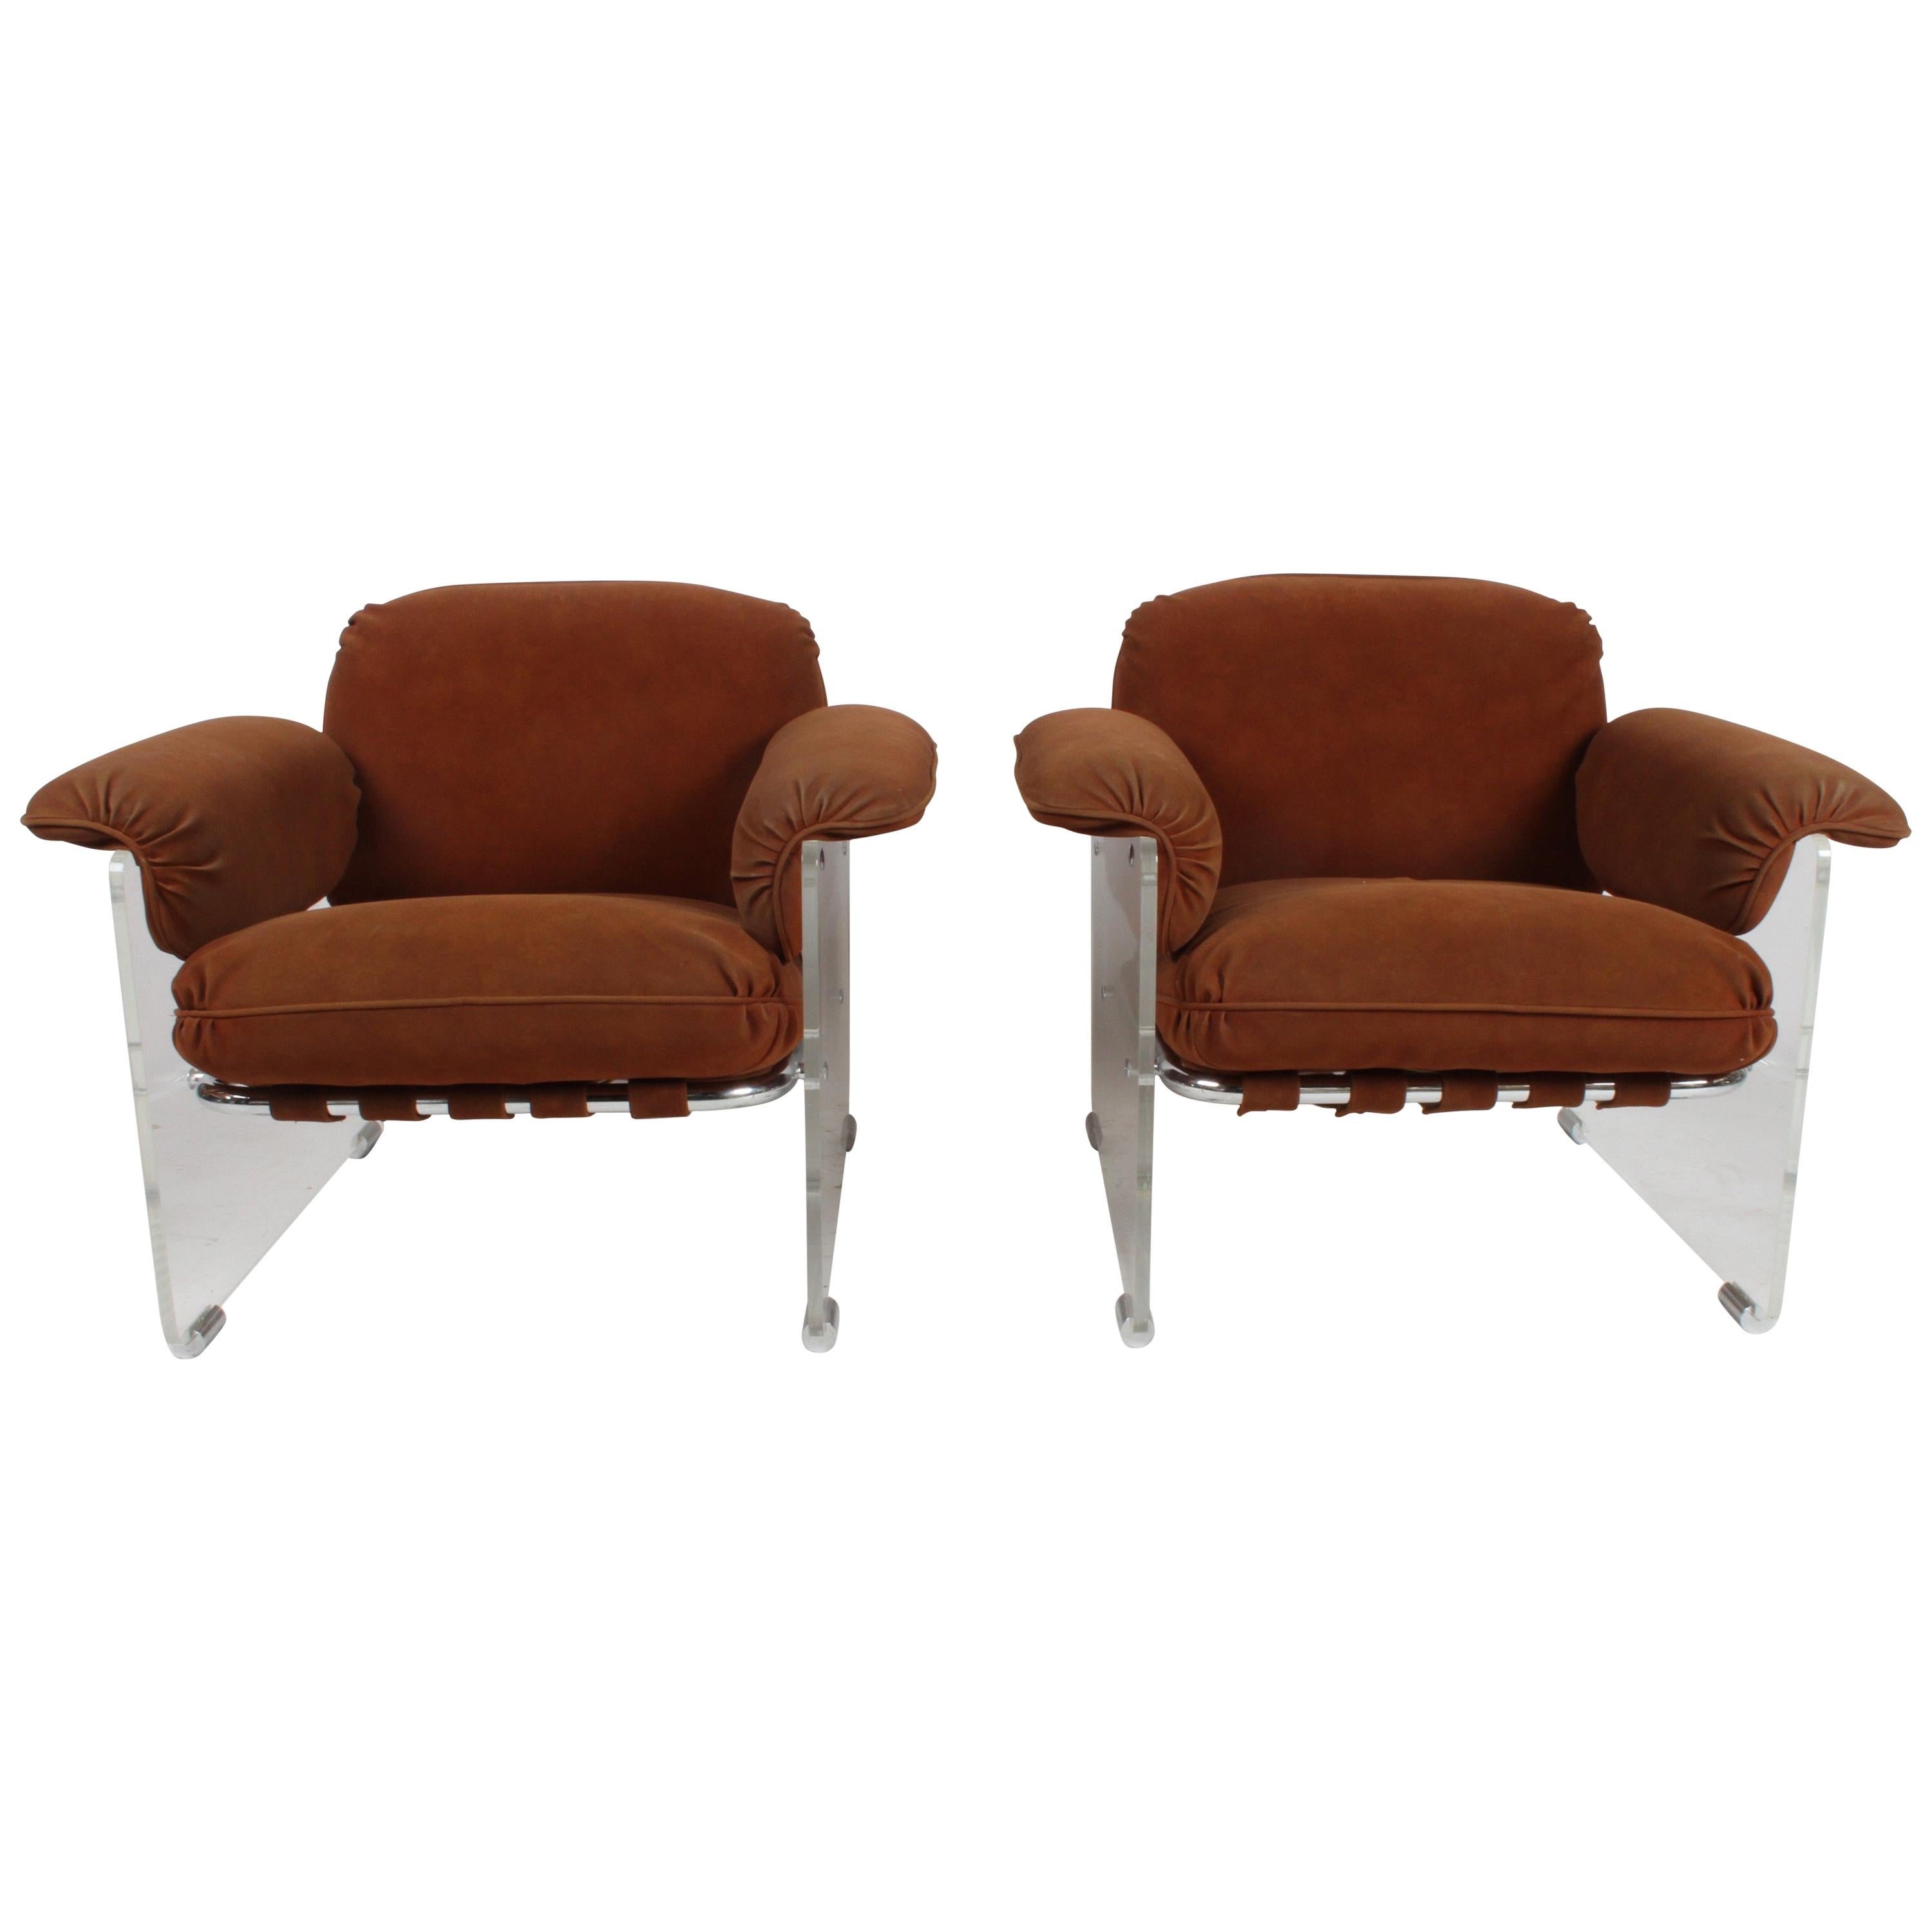 Pace Collection Argenta Lucite Lounge Chairs, circa 1970s